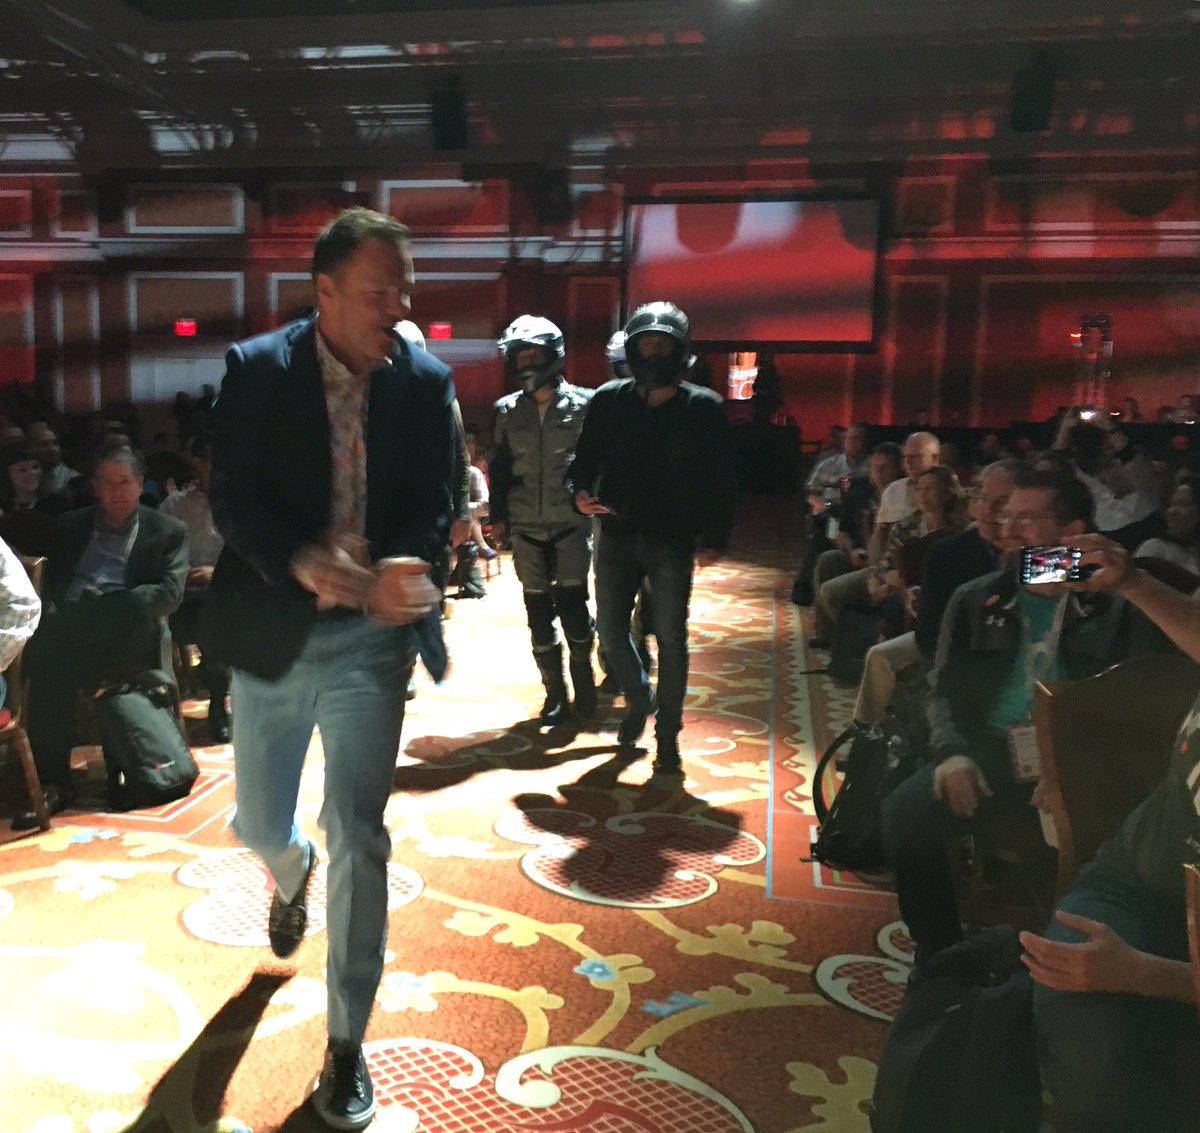 magento: The #roadtoimagine crew make their entrance with @JC_Climbs at the final general session of #MagentoImagine https://t.co/zxBAfCvenv